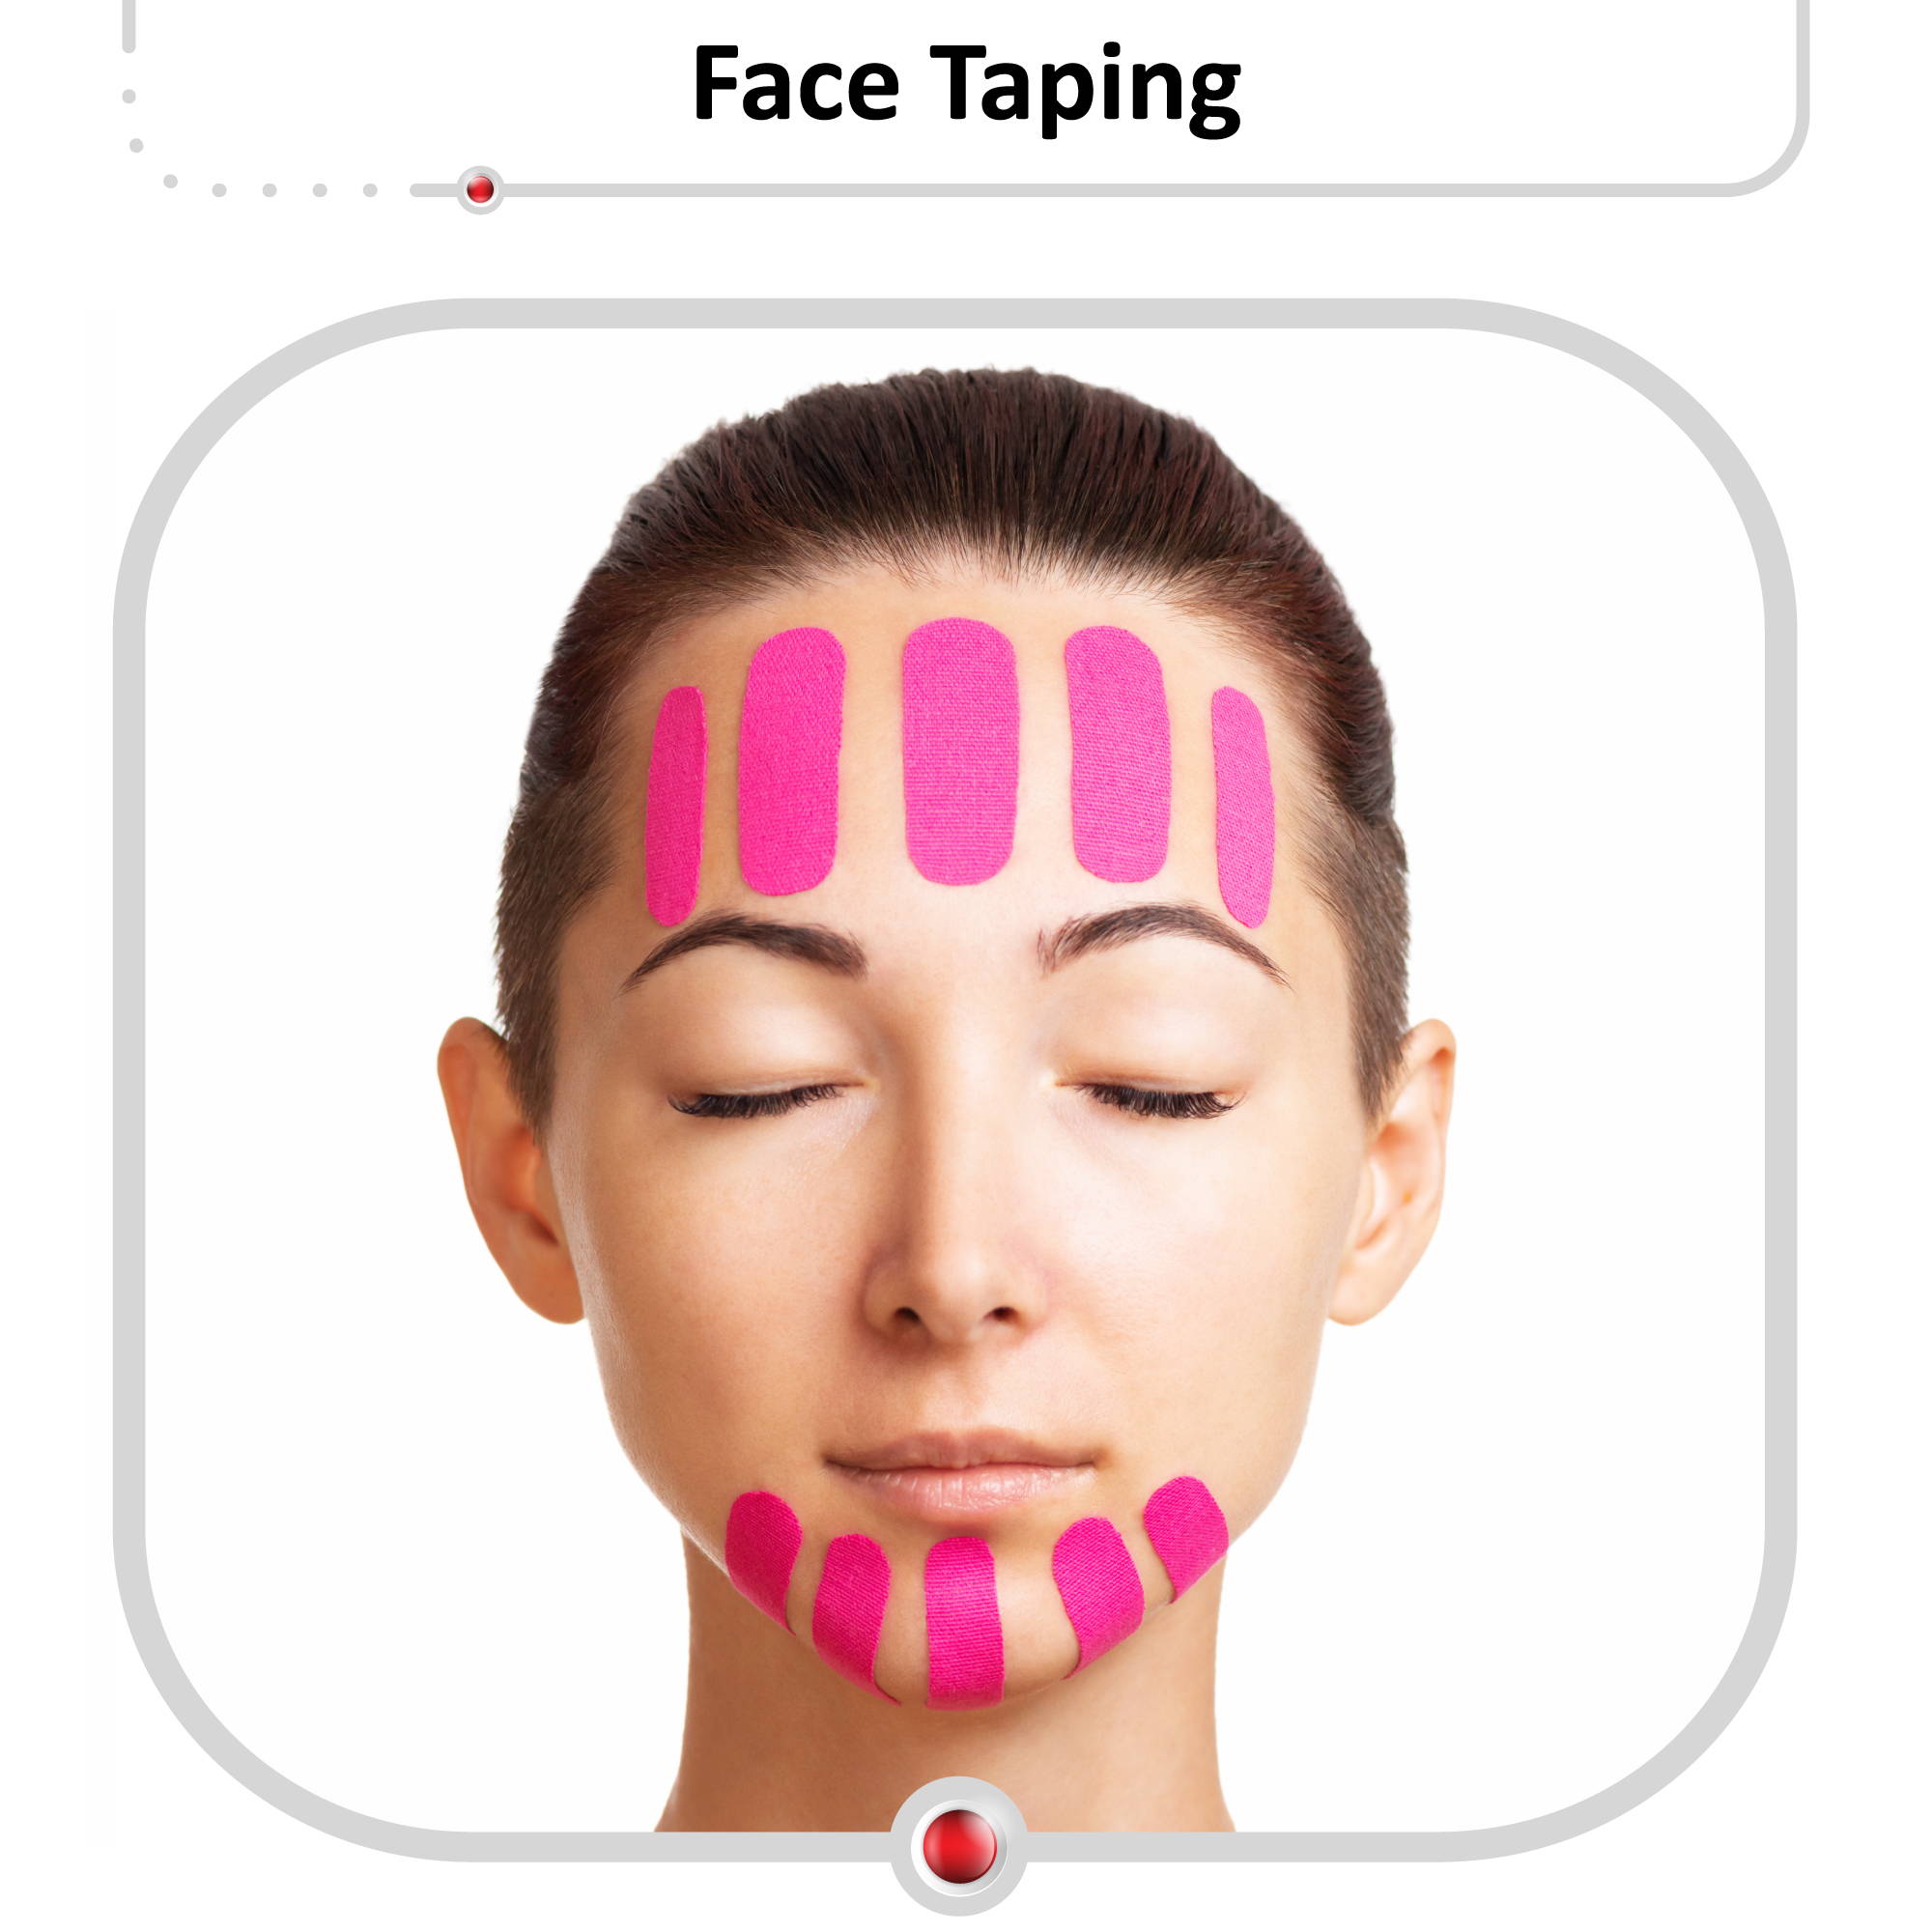 FIT-FACES FACIAL KINESIO TAPE COURSE + FACE TAPING BOOK